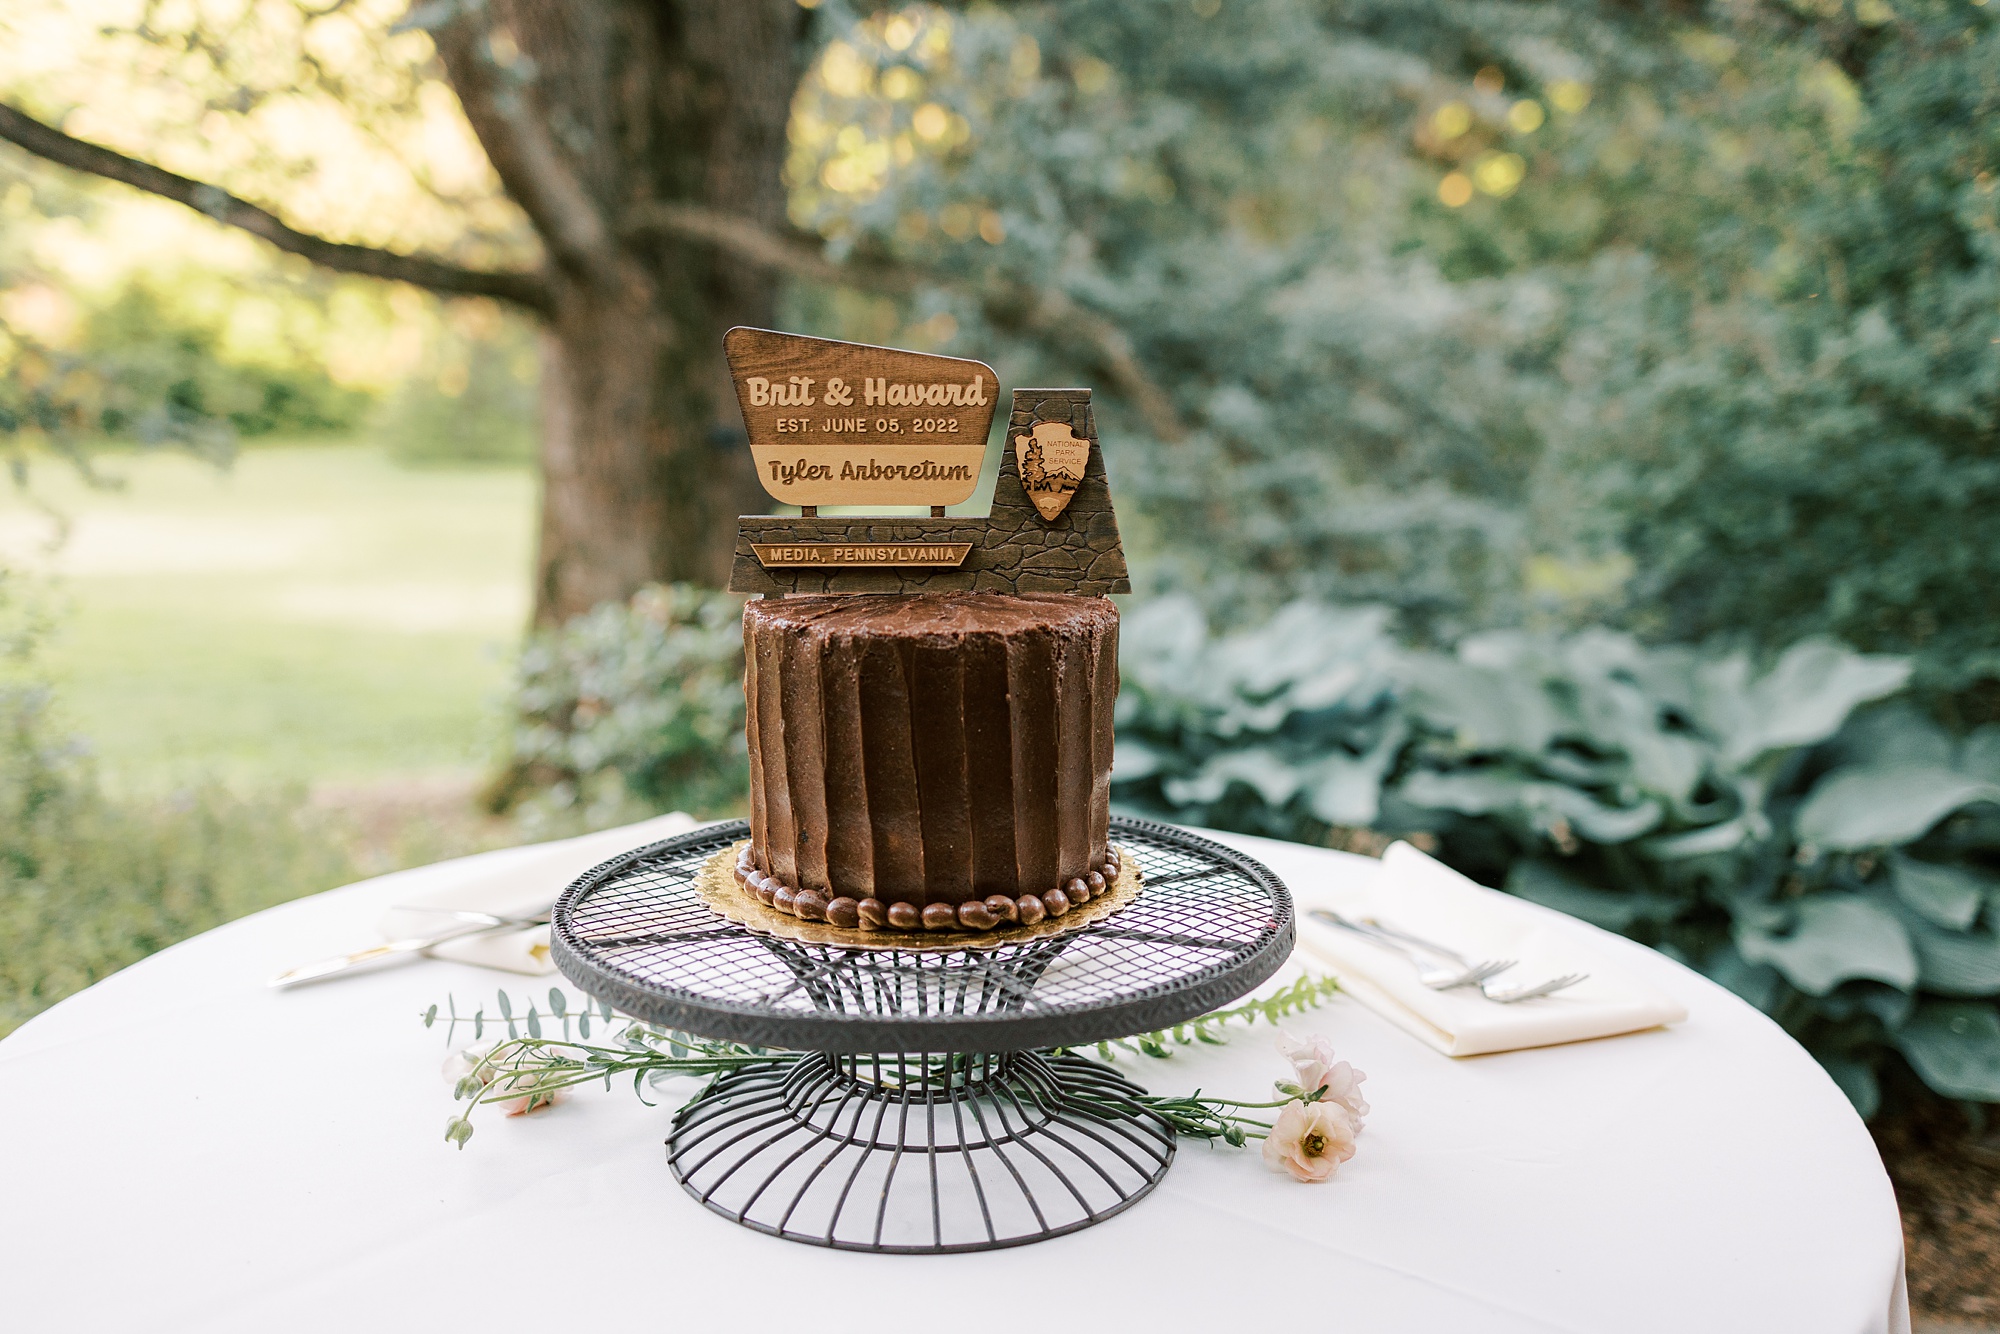 chocolate wedding cake inspired by national park sign sits on table outside 